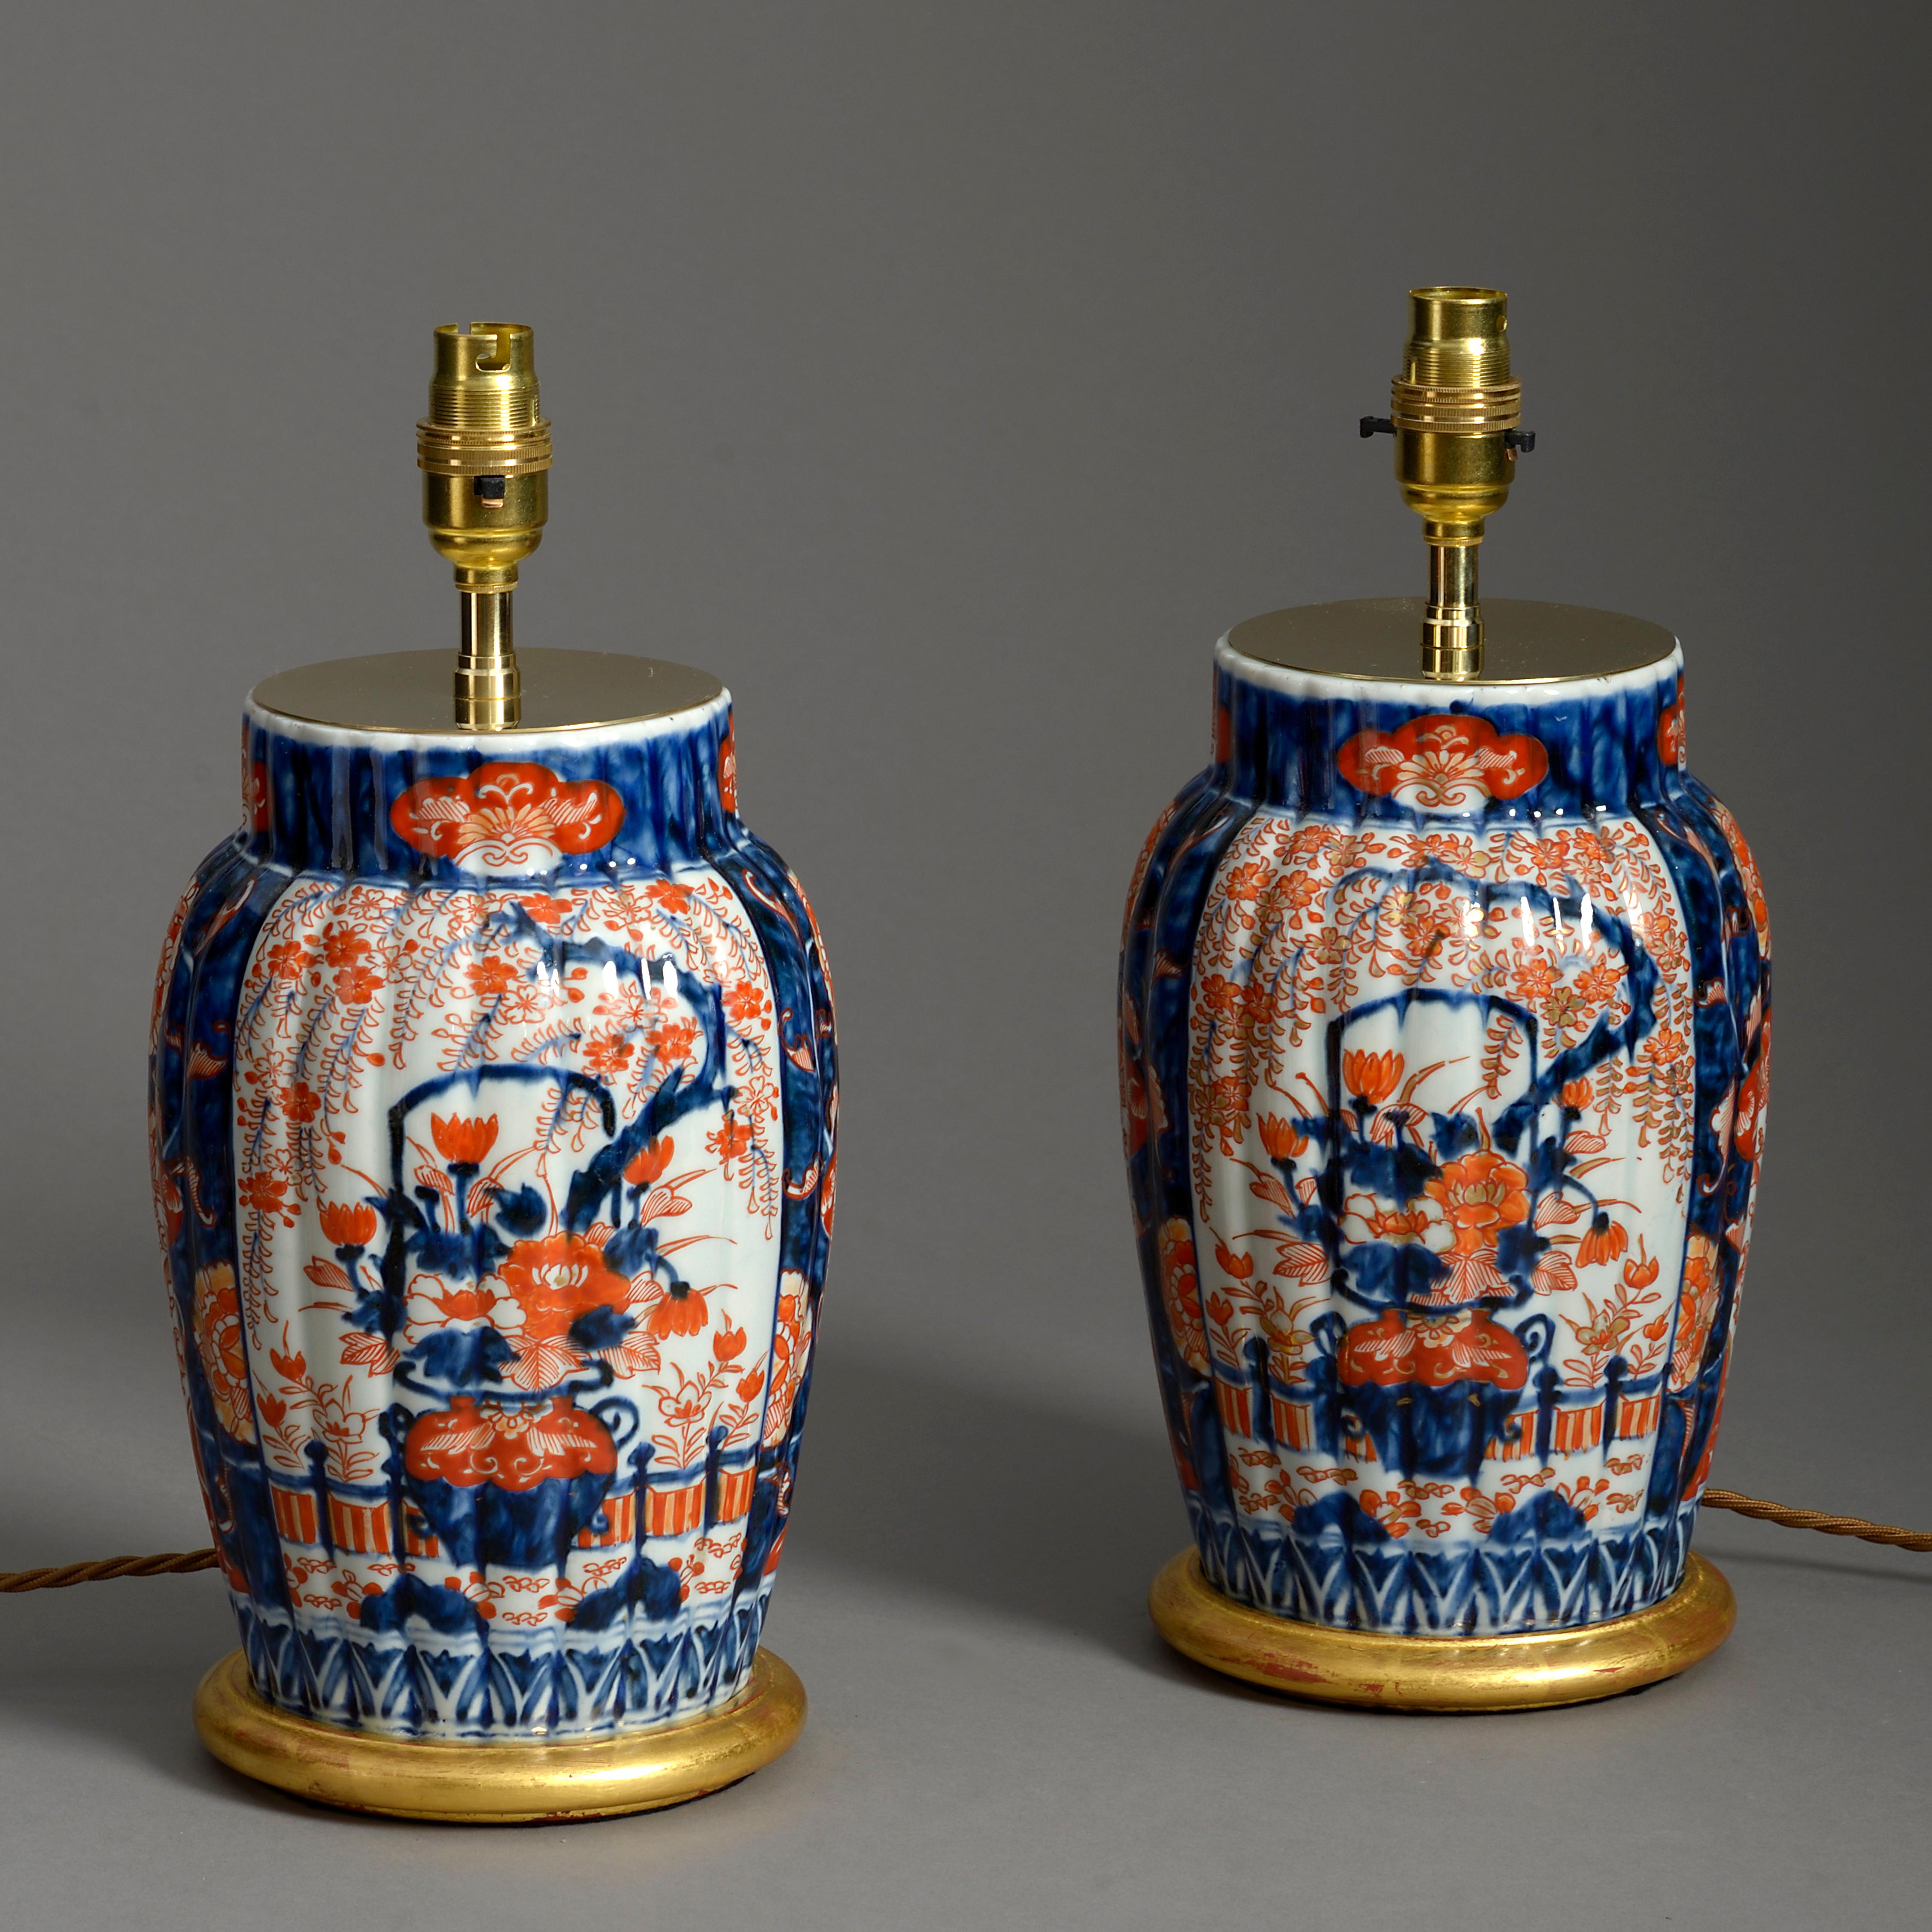 A pair of late nineteenth century Imari porcelain vases, the bodies of ribbed form and decorated with cartouches of flowers and foliage in red, blue and gold glazes upon a white ground. Meiji Period

Now mounted as lamps with hand-turned water